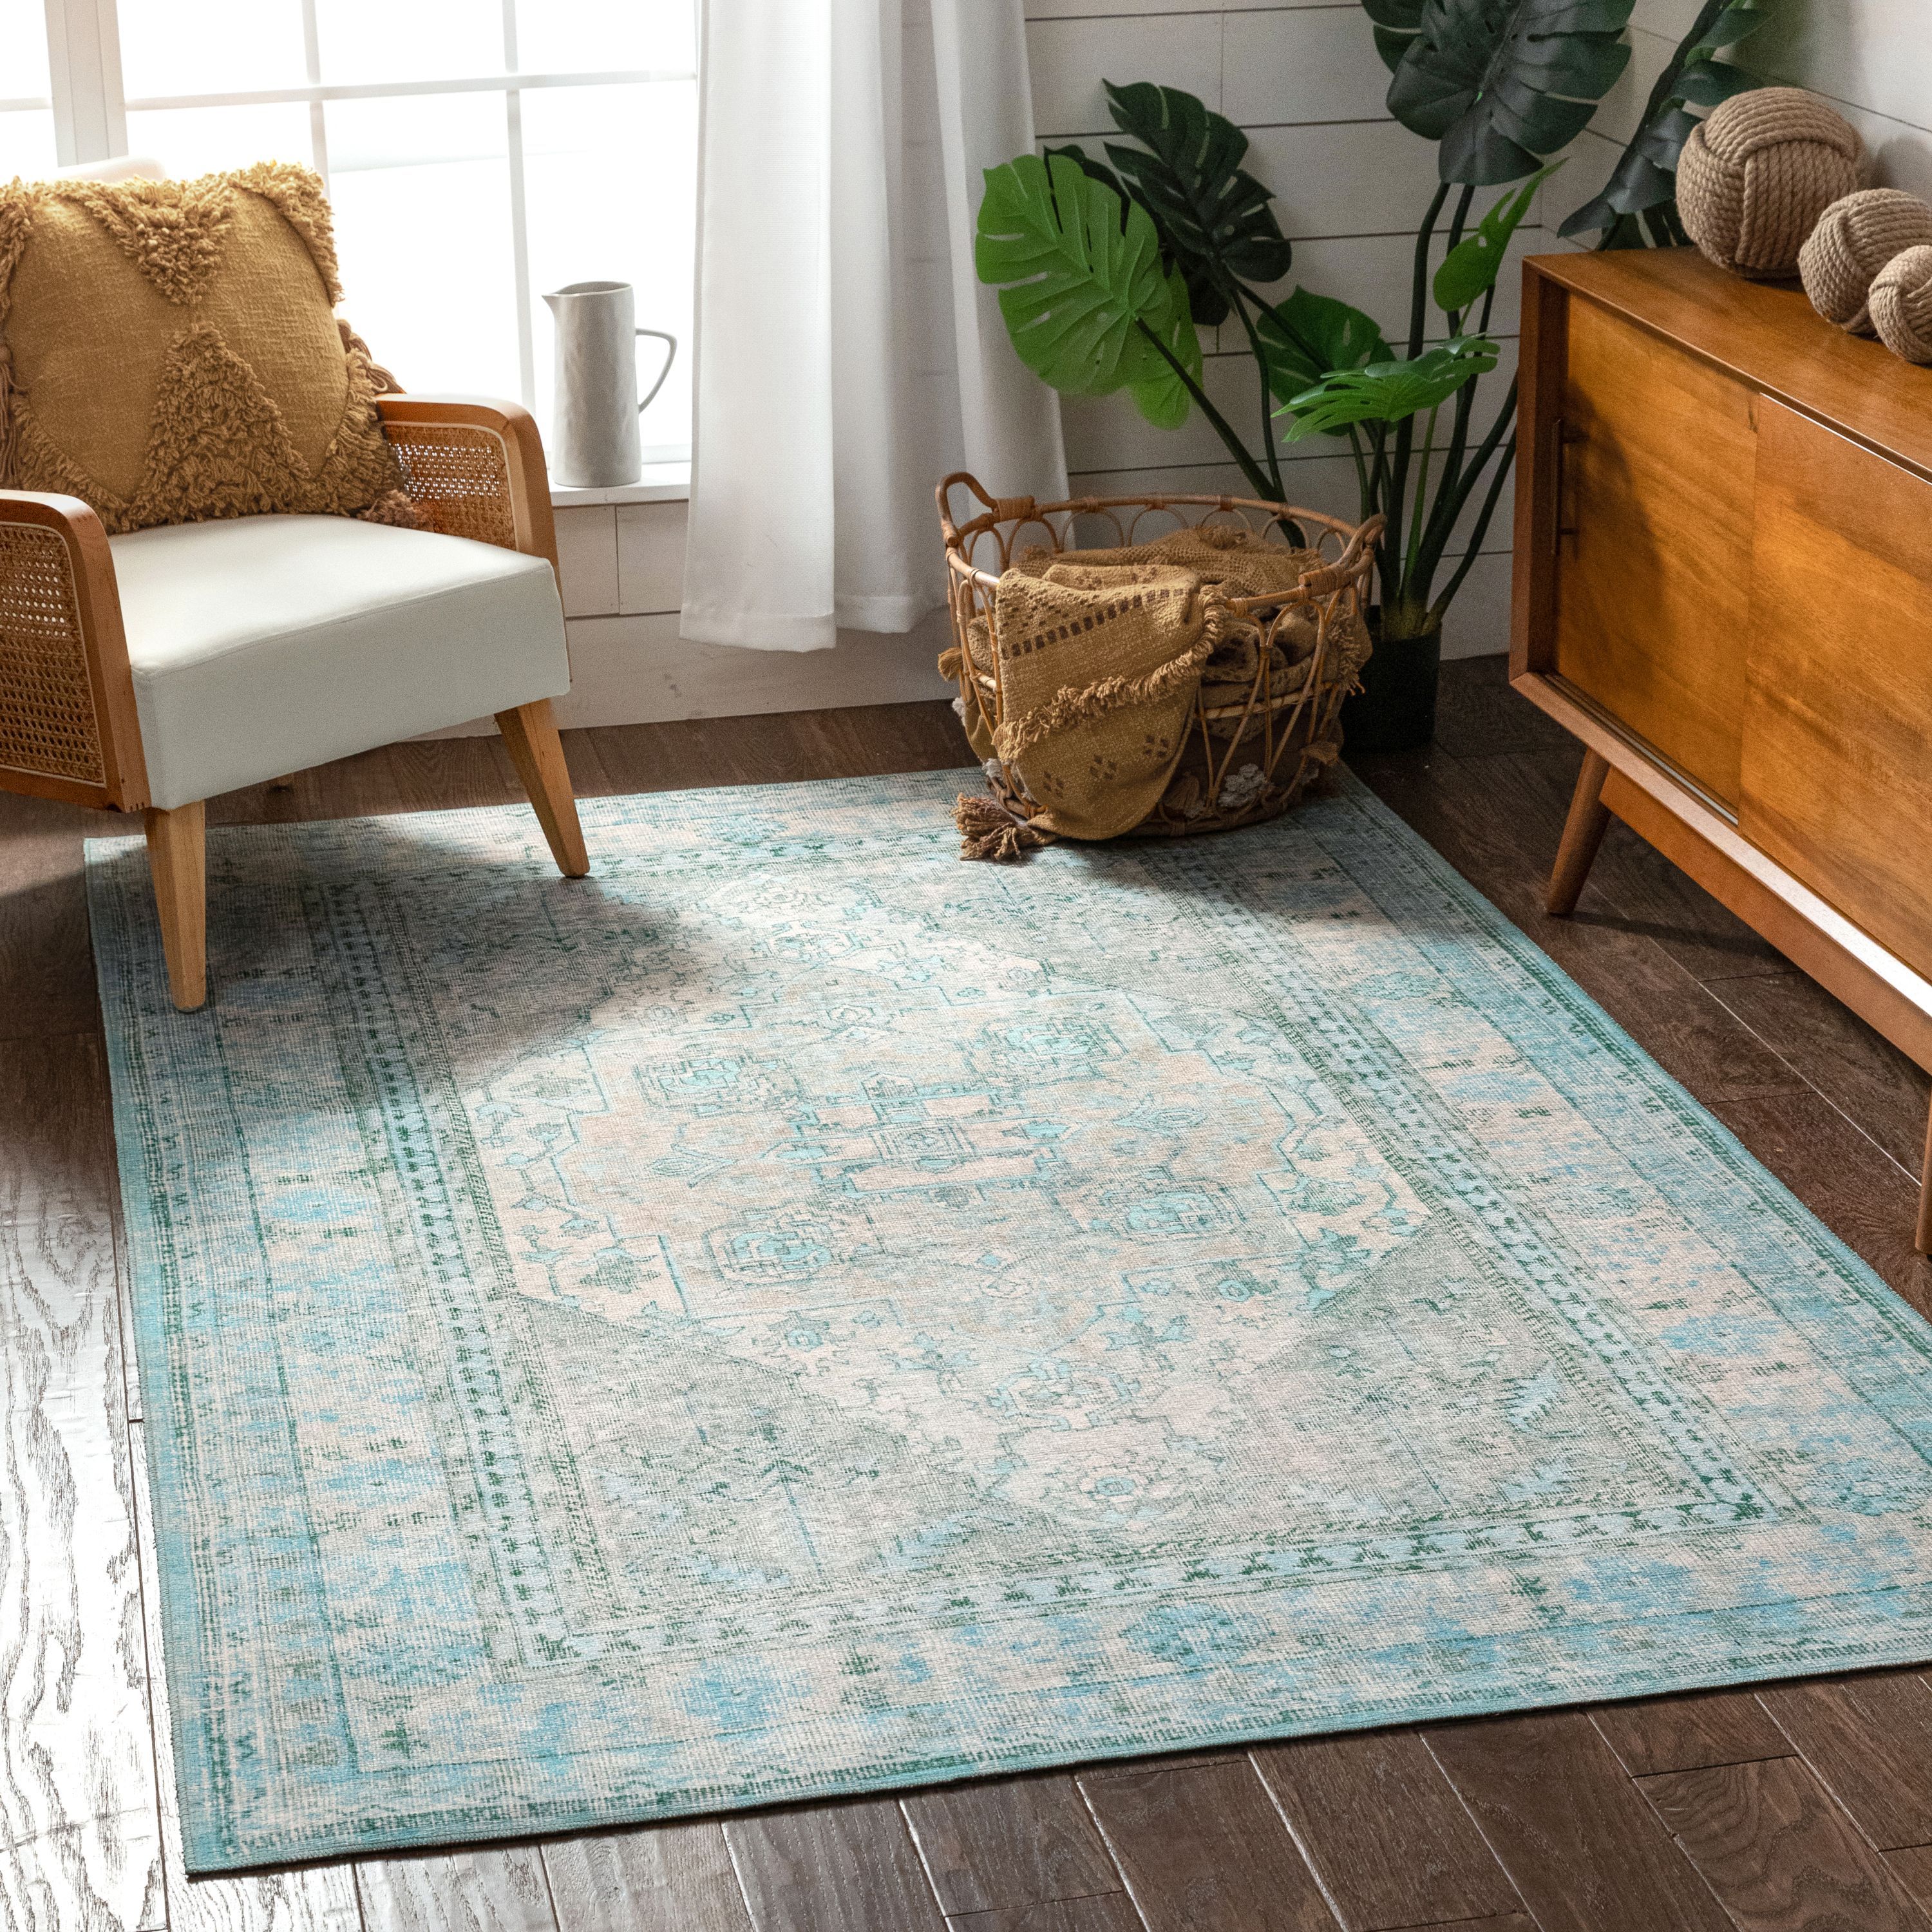 28 Machine Washable Rugs Perfect For, Are Ruggable Rugs Really Washable